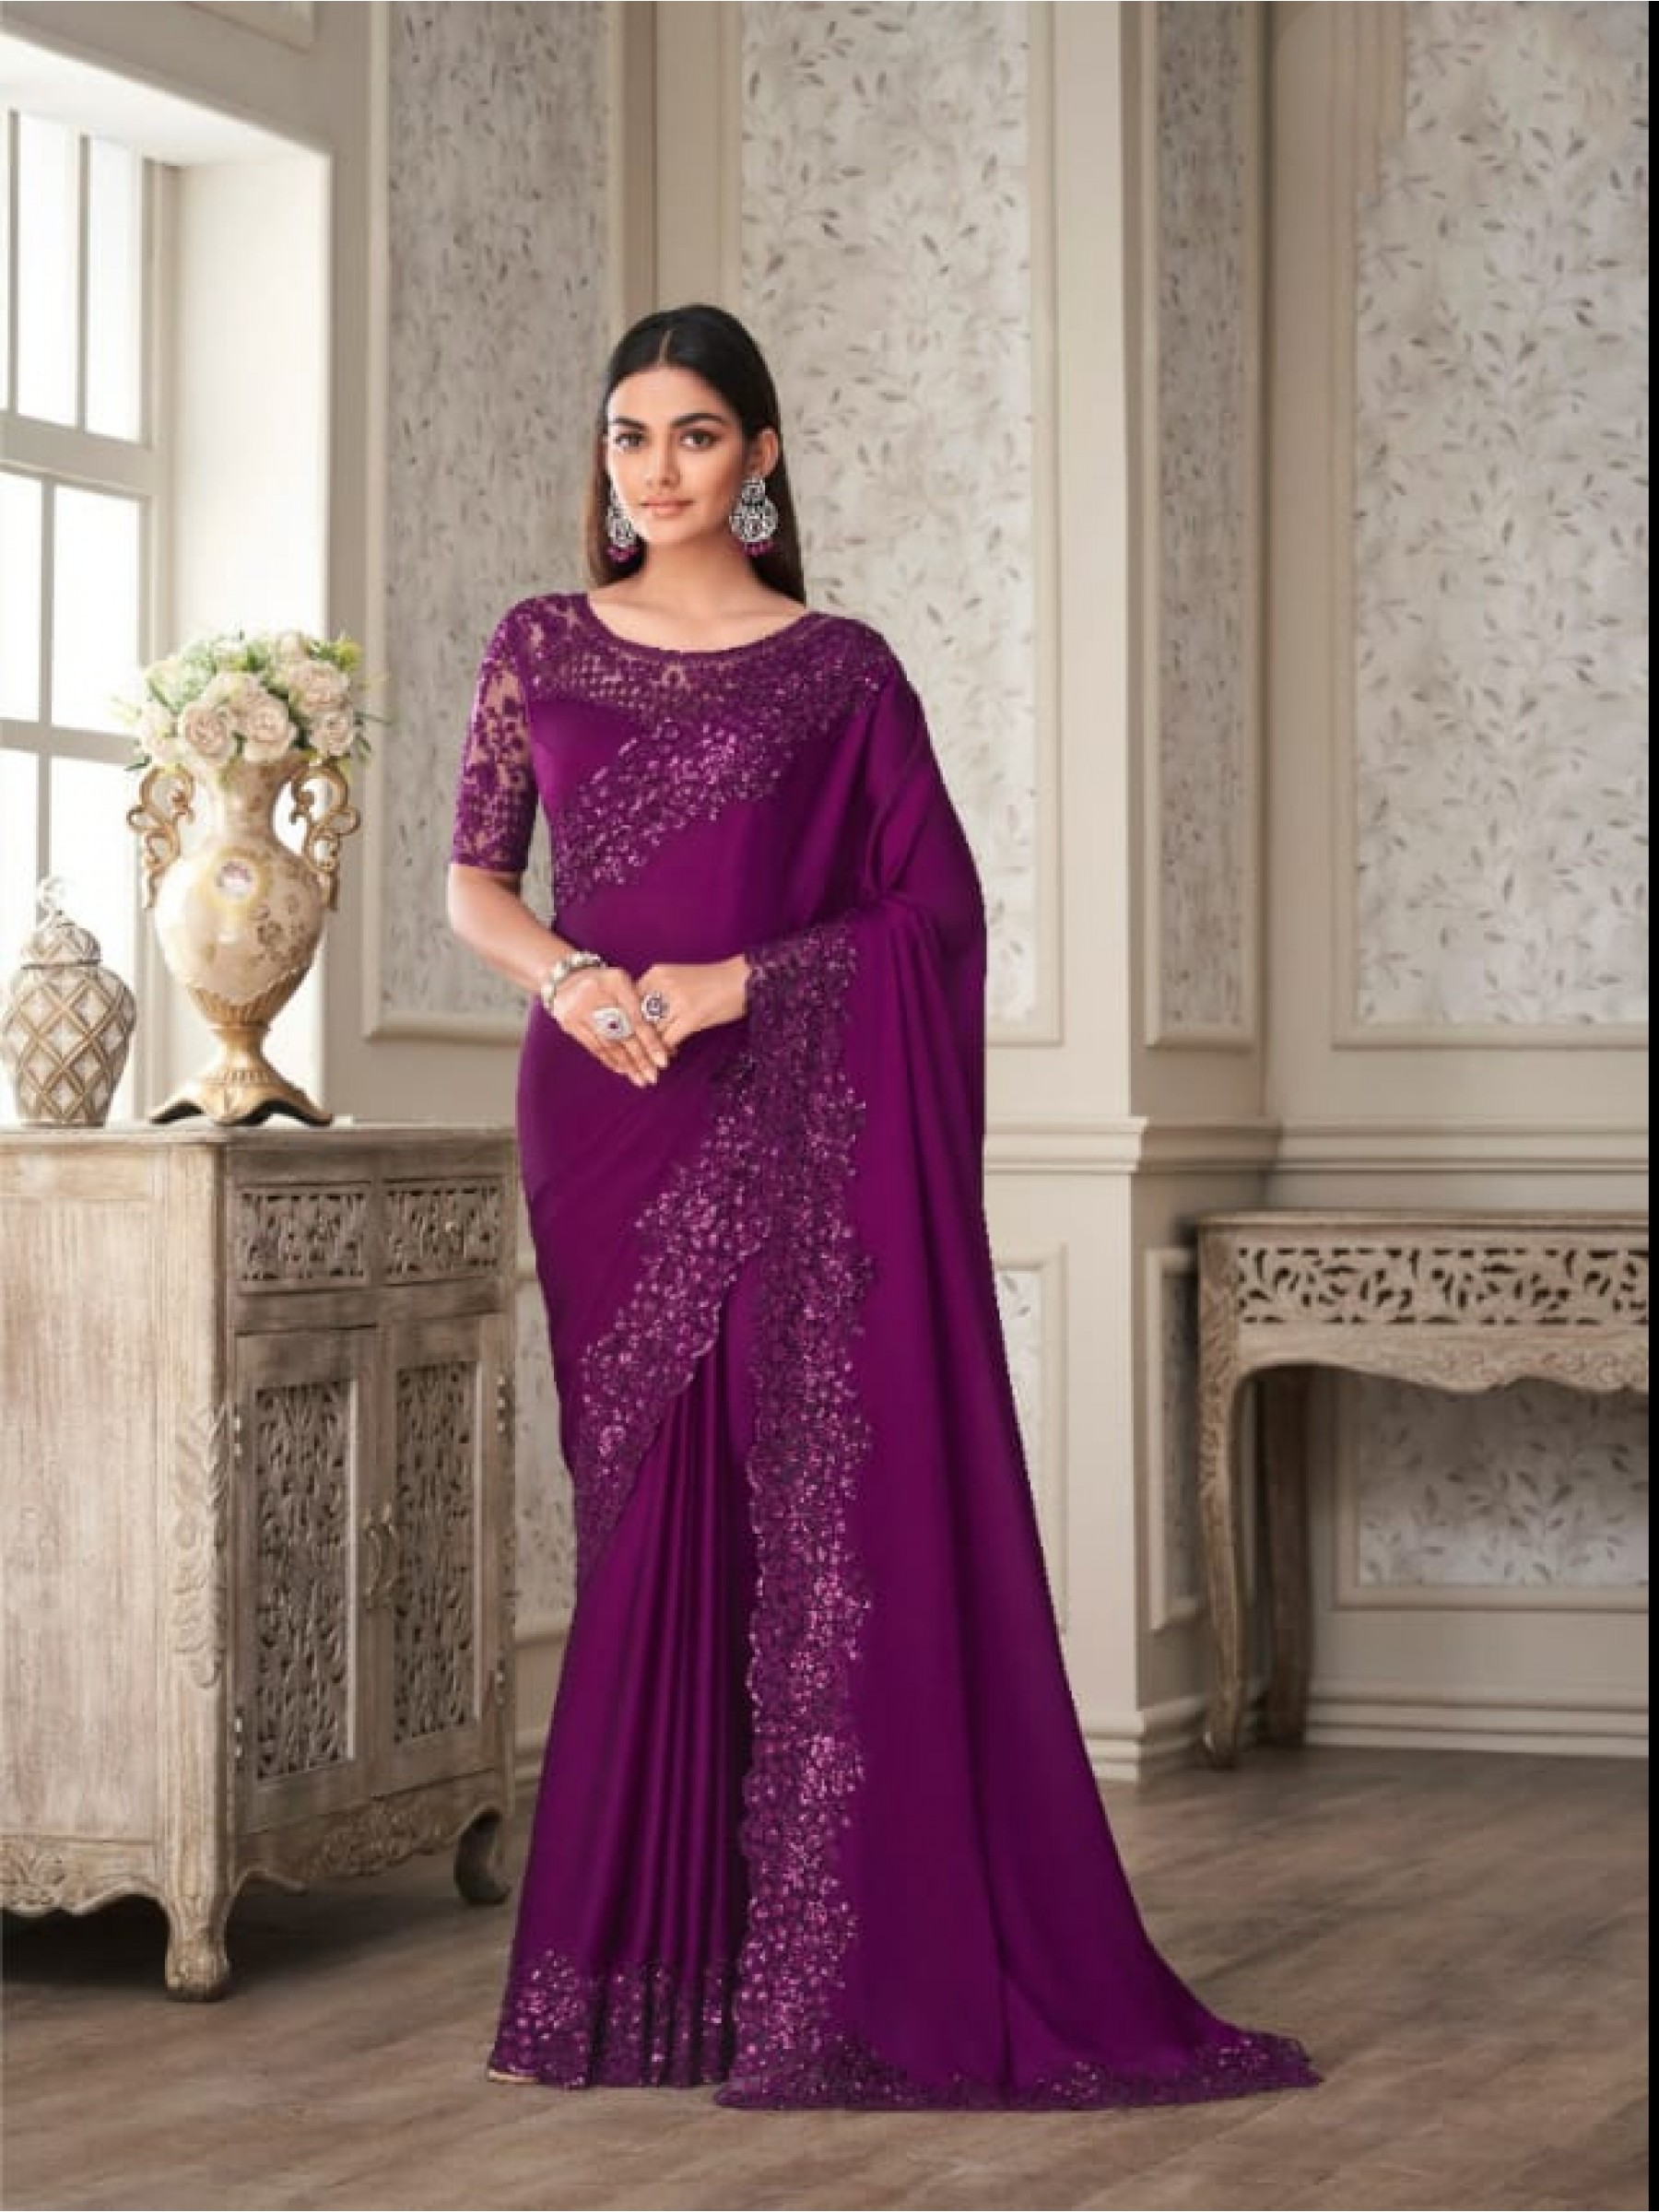 Sateen Chiffon Party Wear  Saree In Purple Color With Embroidery Work